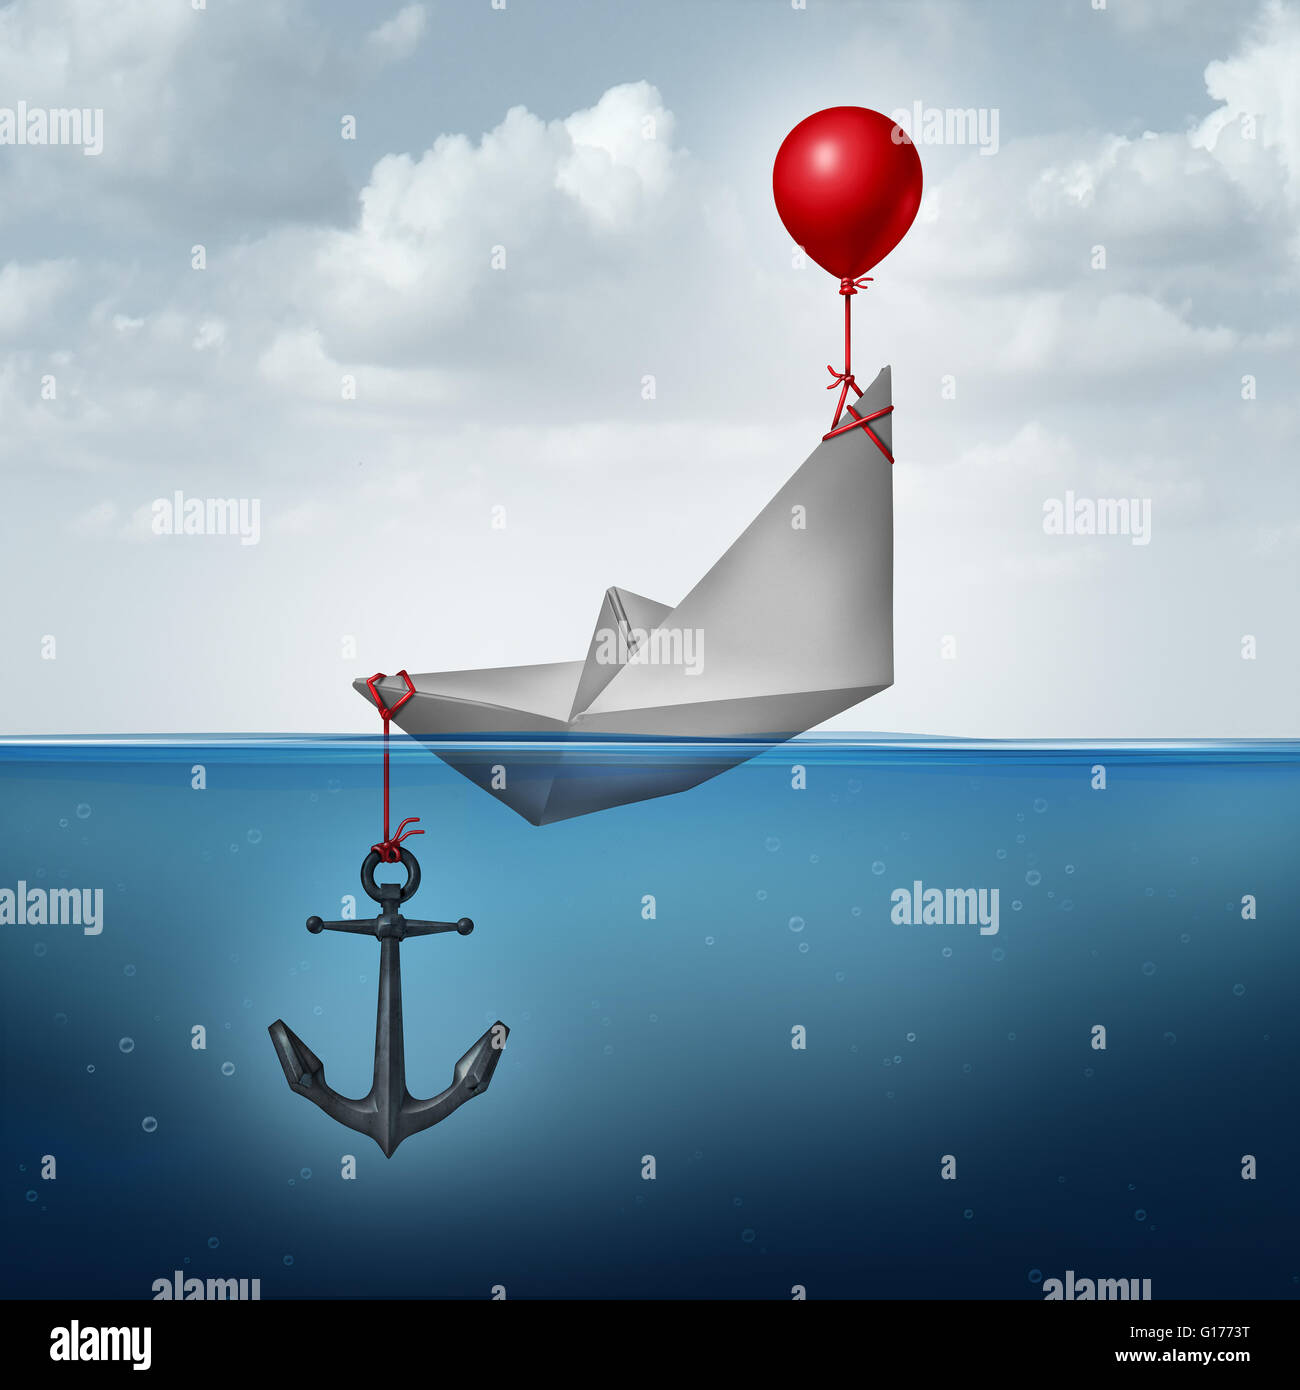 Business decision problem and inefficient strategy concept as a paper boat being lifted and drowned simultaneously as a financial indecision icon with 3D illustration elements. Stock Photo